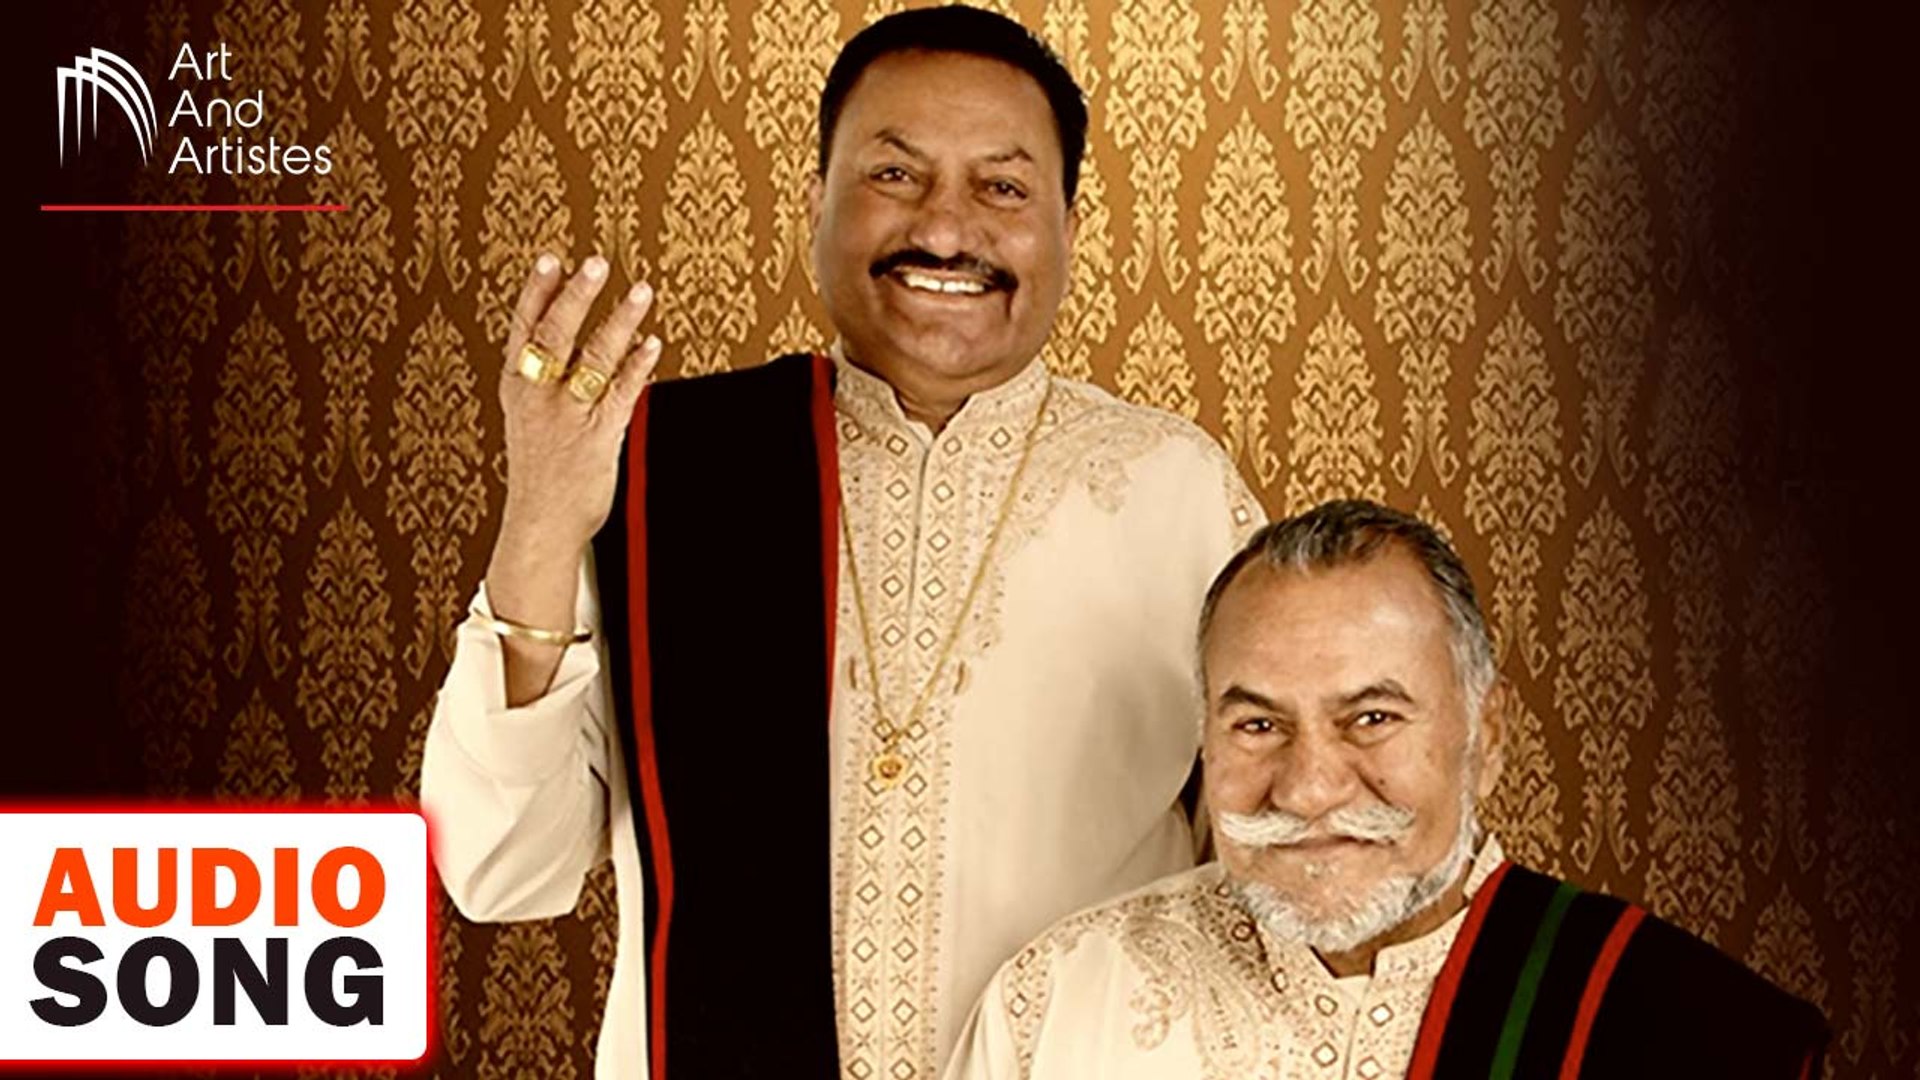 Pave Suli Chadhna | Wadali Brothers | Sufi | Audio Song With Crbt Codes | Art And Artistes